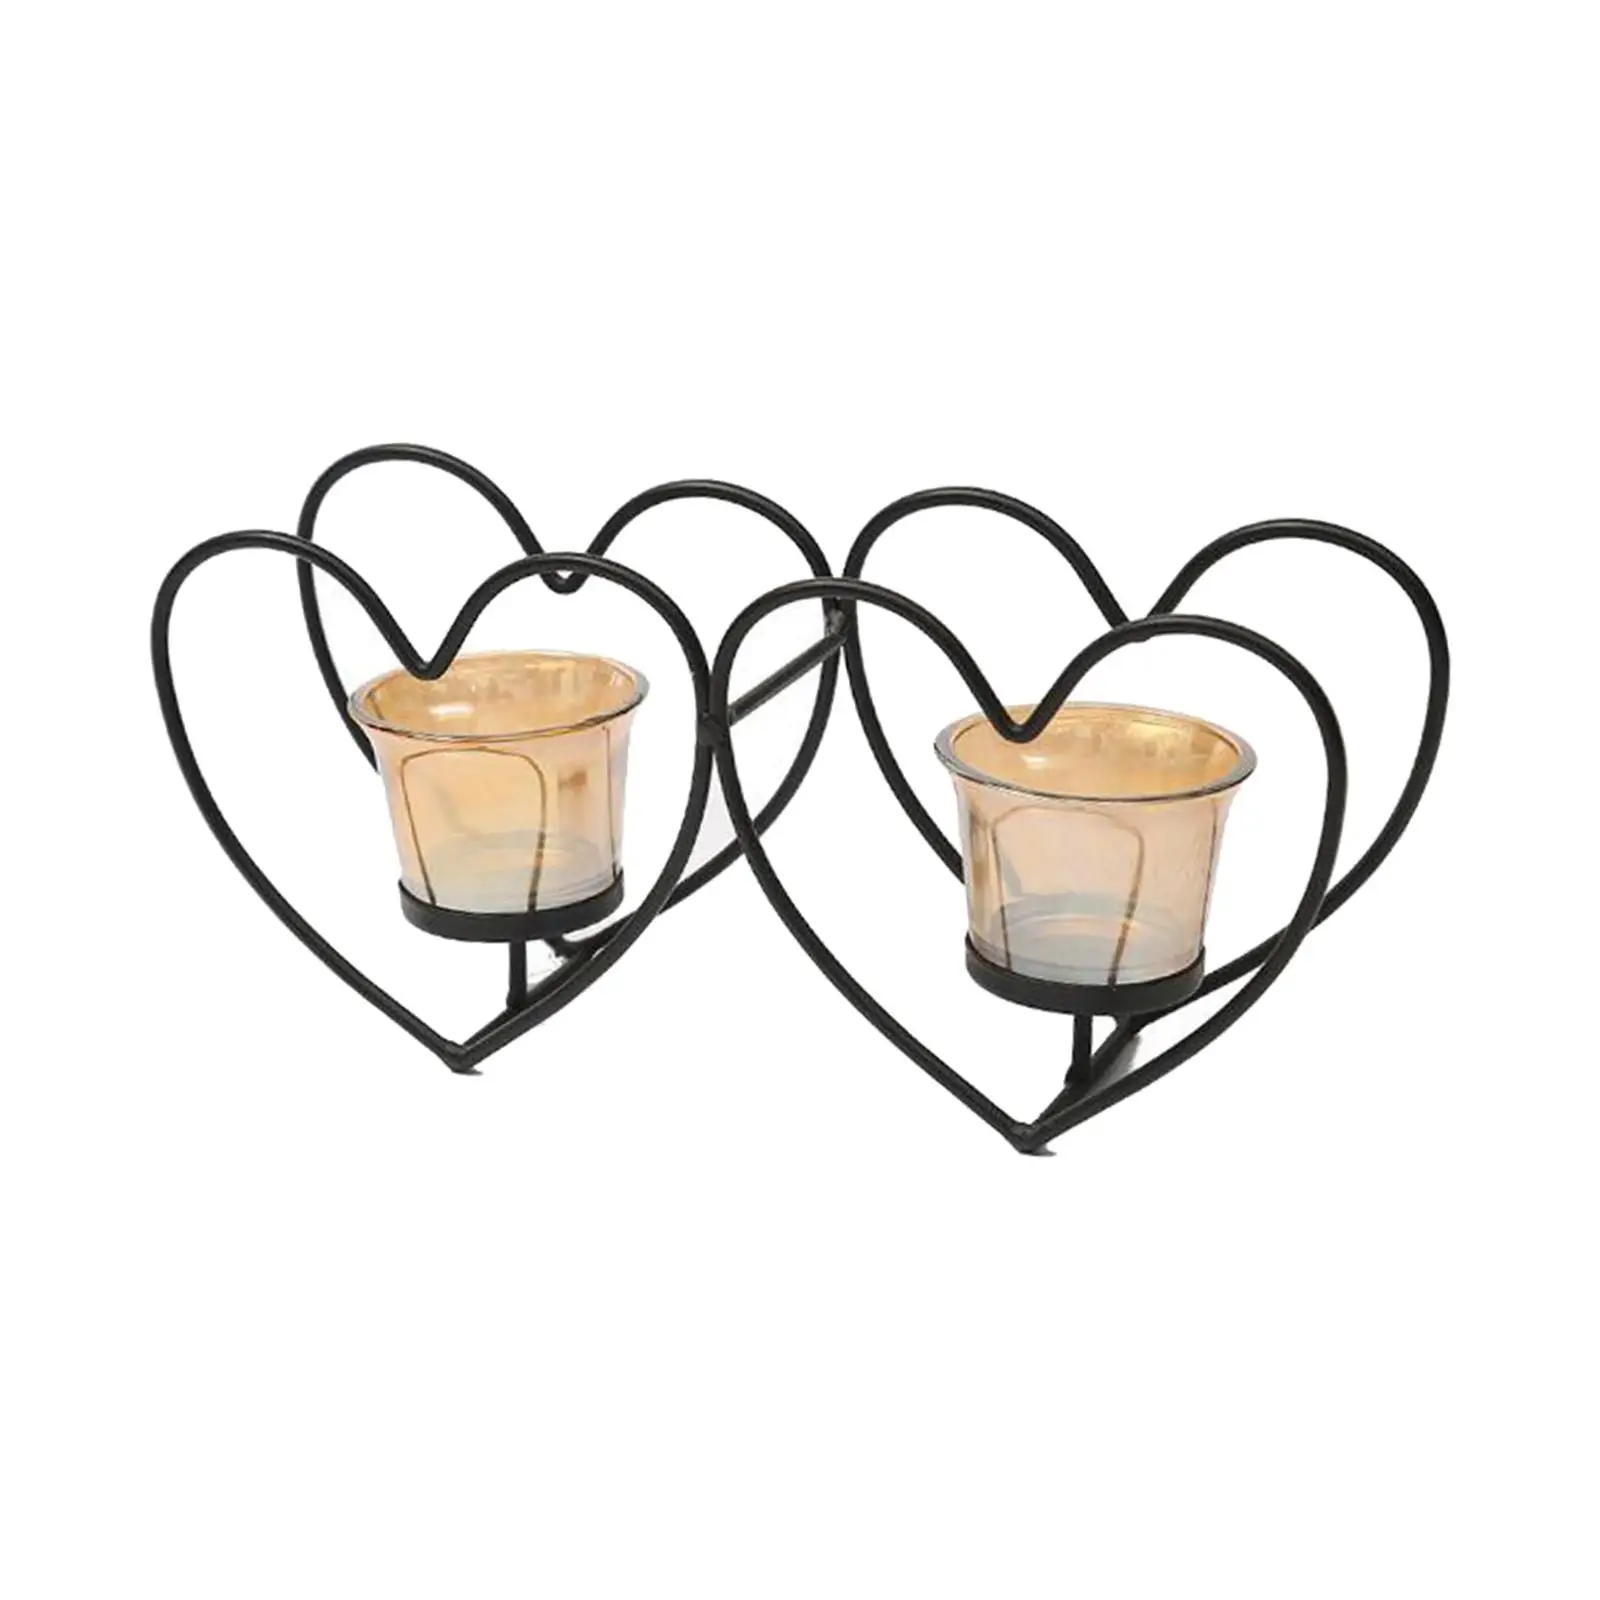 Nordic Heart Candle Holder Metal Candlestick Decorative Candle Stand Party Wedding Holiday Birthday Decor